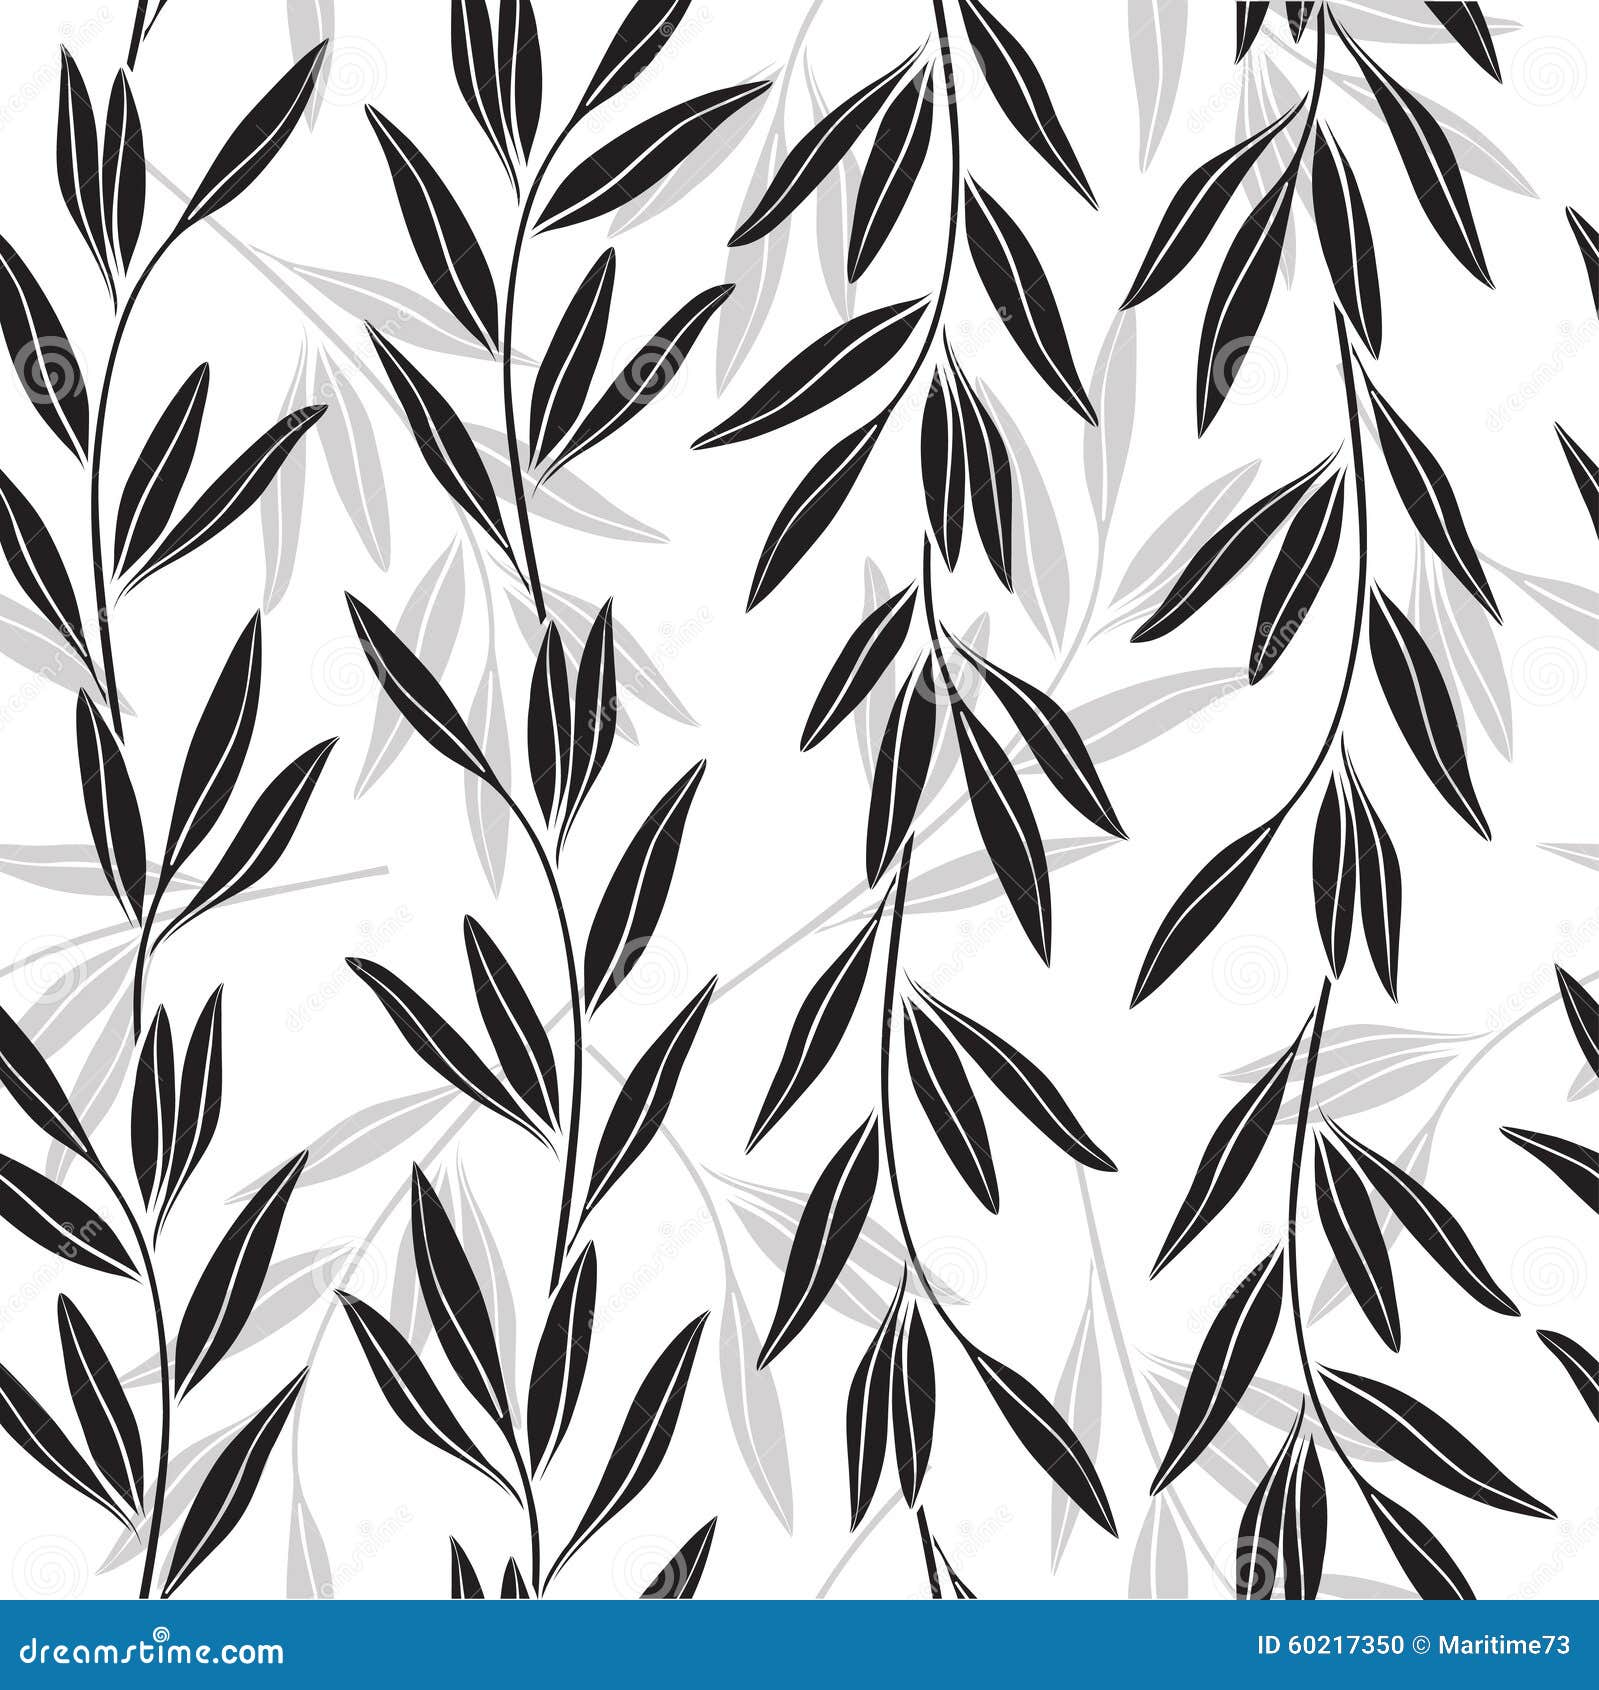 Monochrome Seamless Pattern of Abstract Branches. Stock Illustration